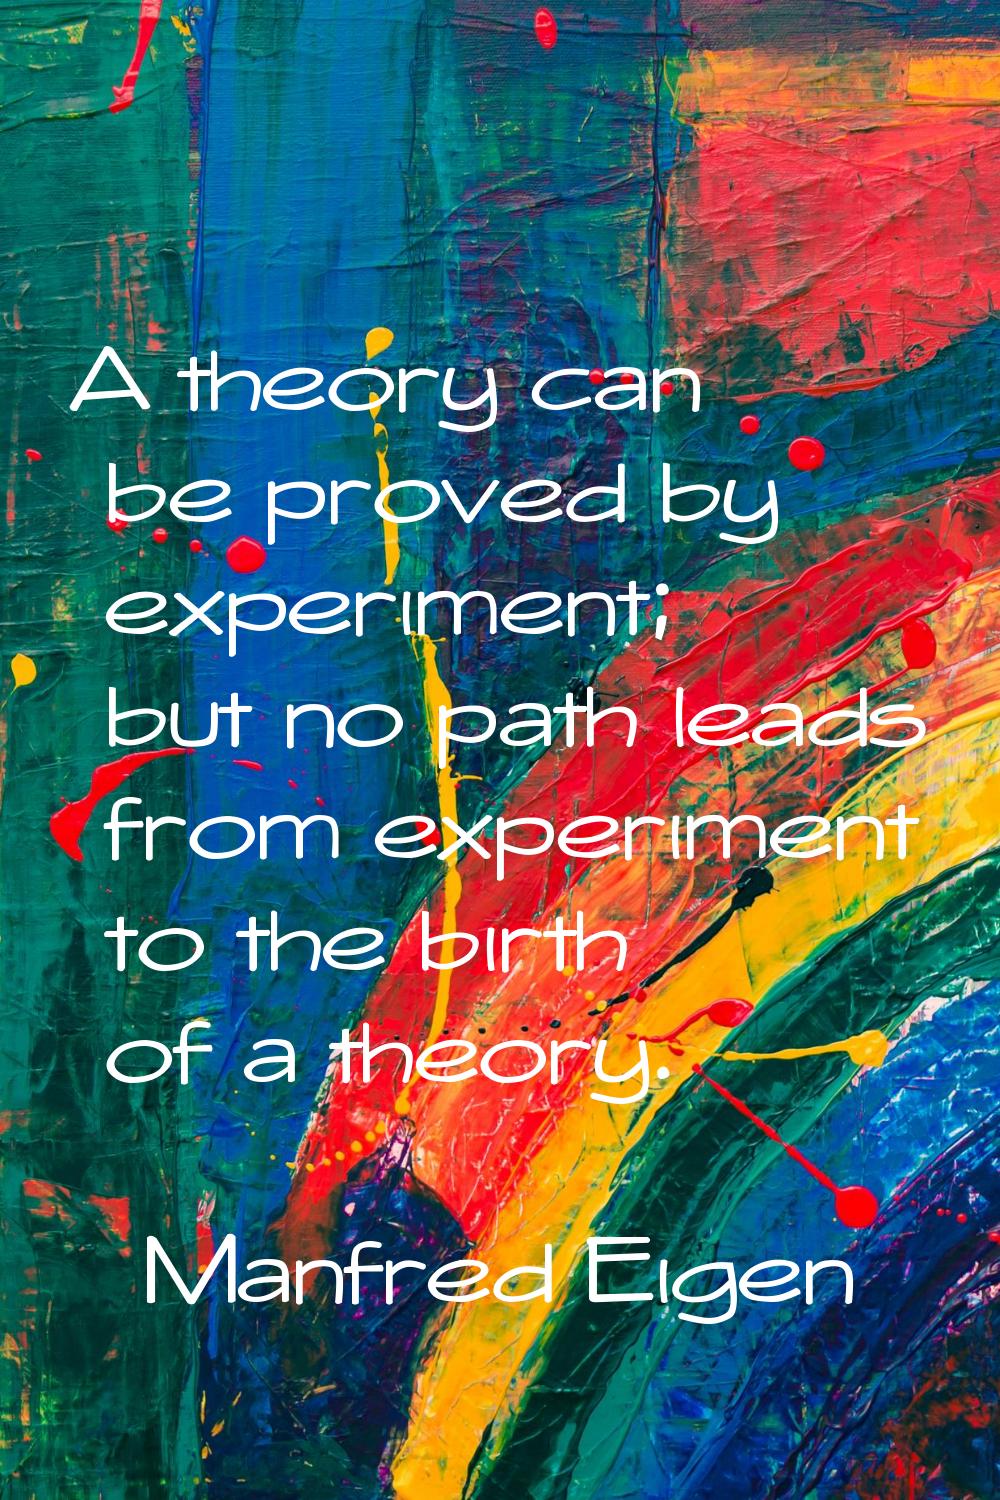 A theory can be proved by experiment; but no path leads from experiment to the birth of a theory.